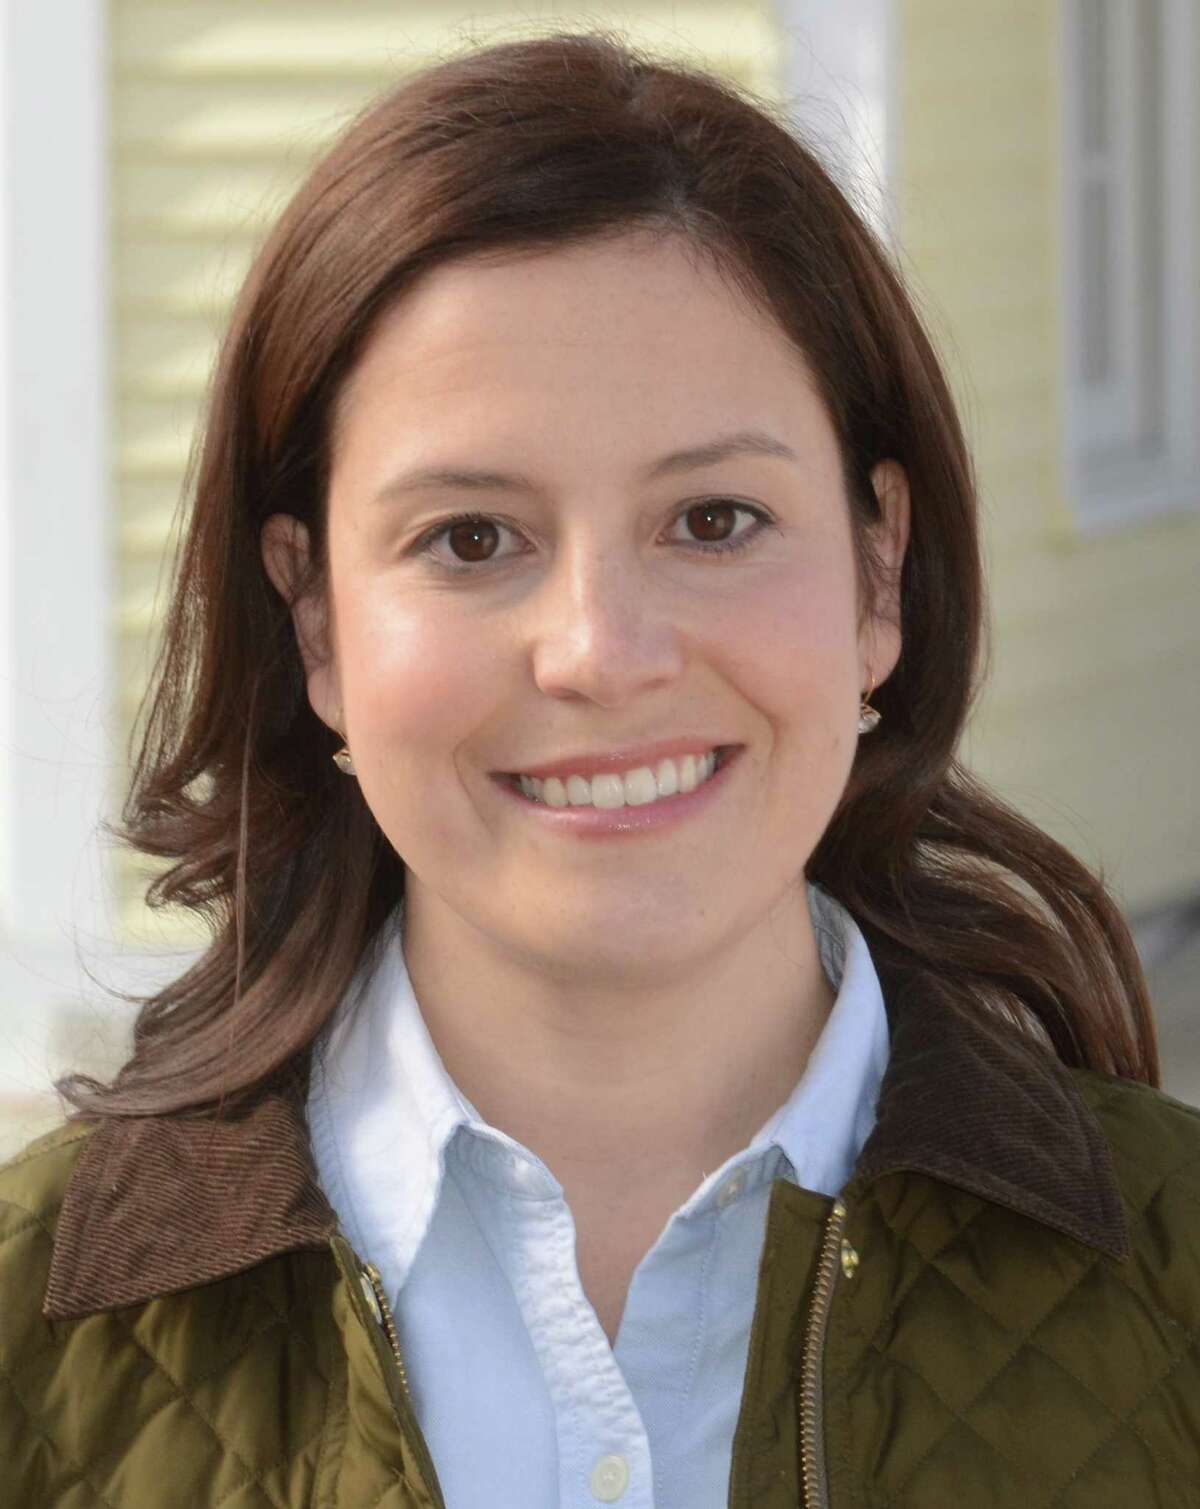 This undated photo provided by the Elise for Congress campaign, shows candidate Elise Stefanik. The former Washington political staffer is running against businessman Matthew Doheny in the Republican primary on Tuesday, June 24, 2014. (AP Photo/Elise for Congress Campaign)